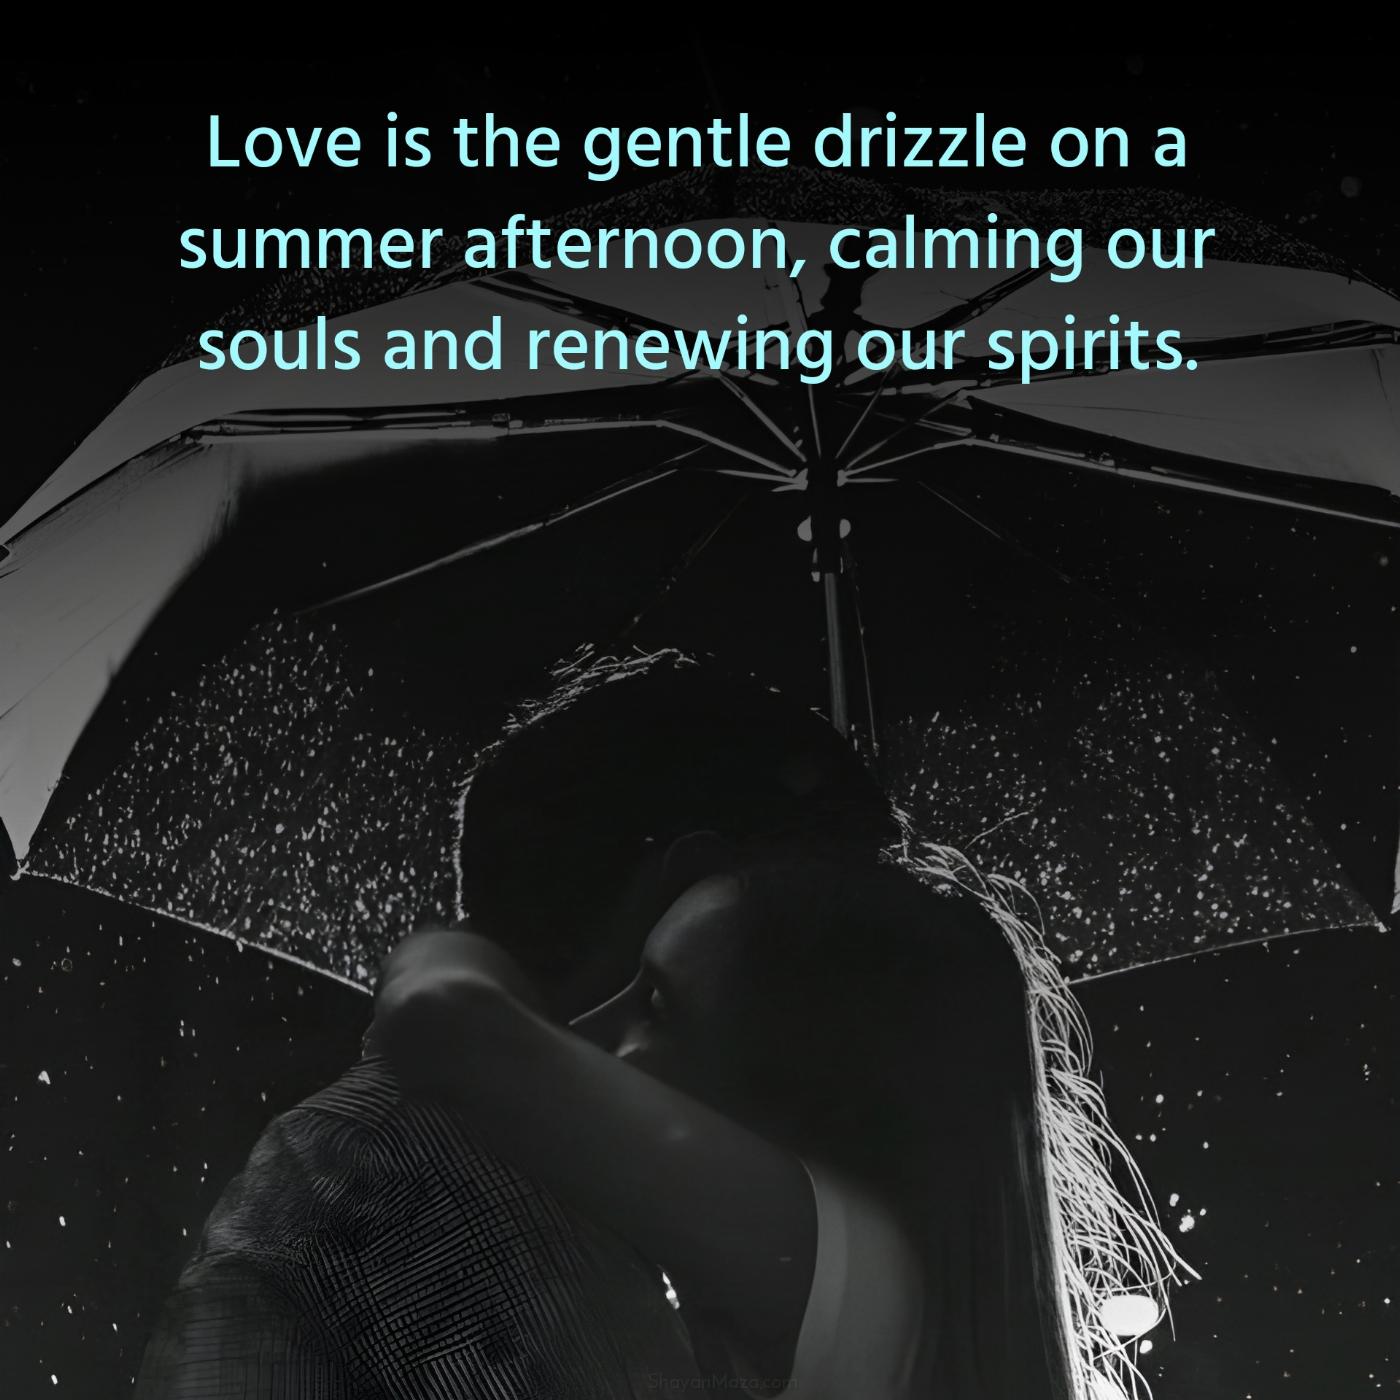 Love is the gentle drizzle on a summer afternoon calming our souls